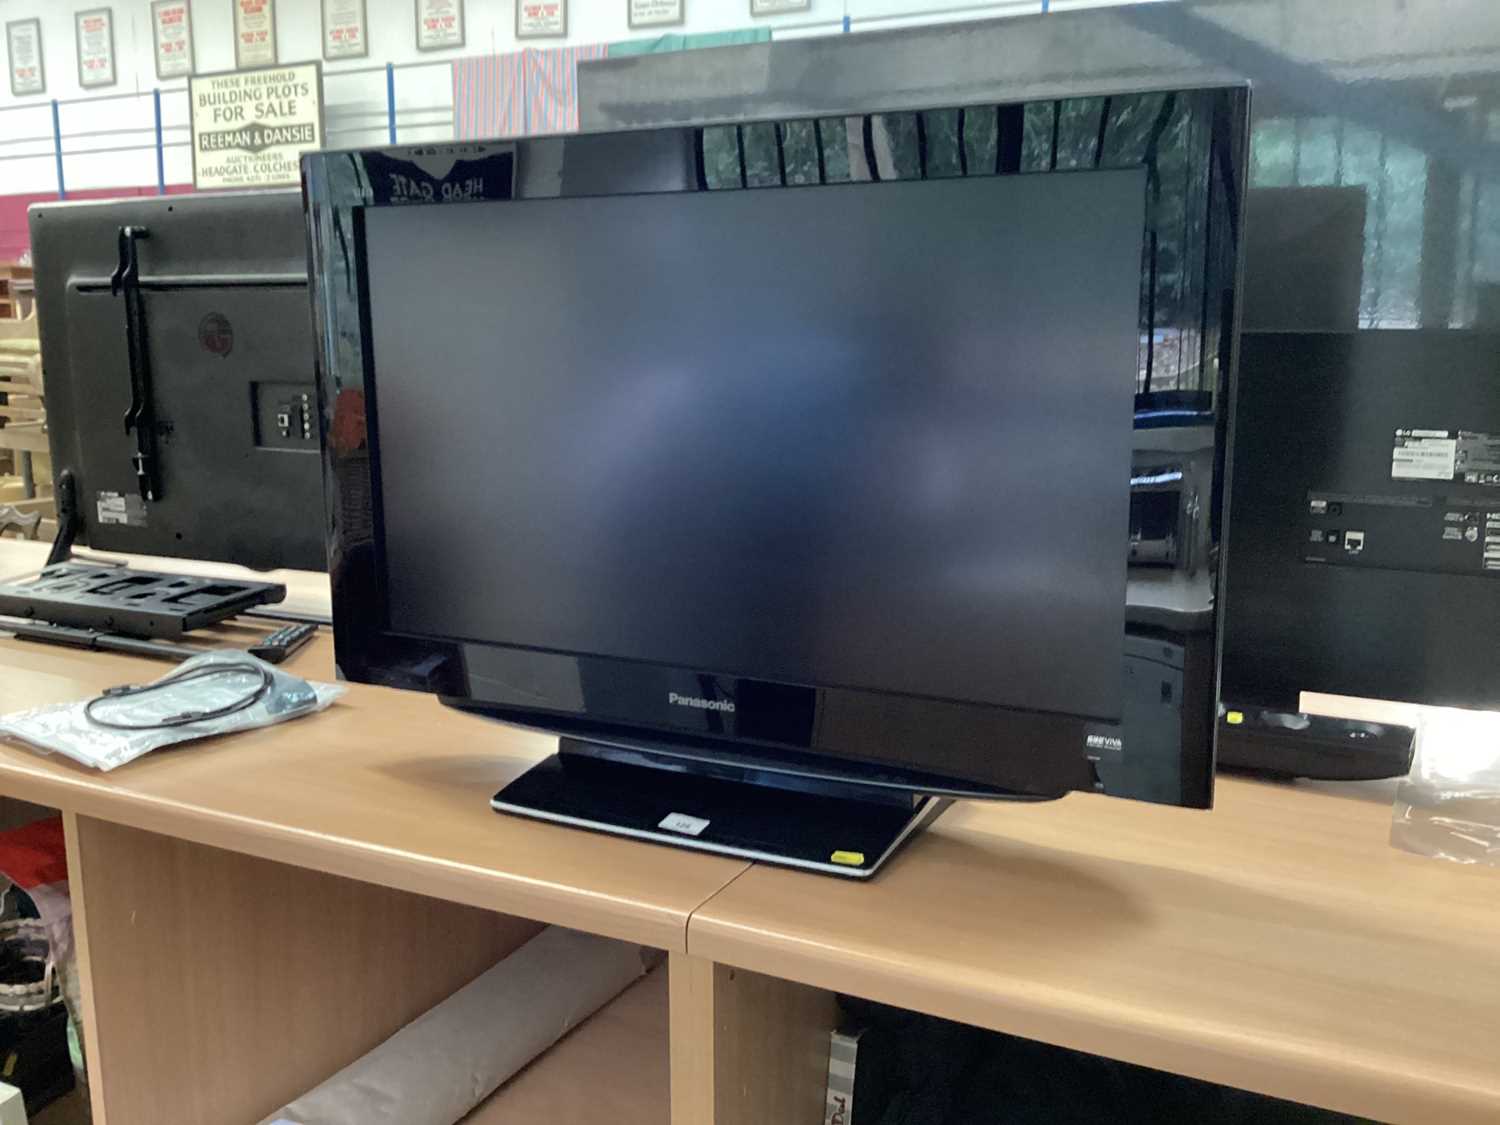 Lot 128 - Panasonic TV with remote and manual